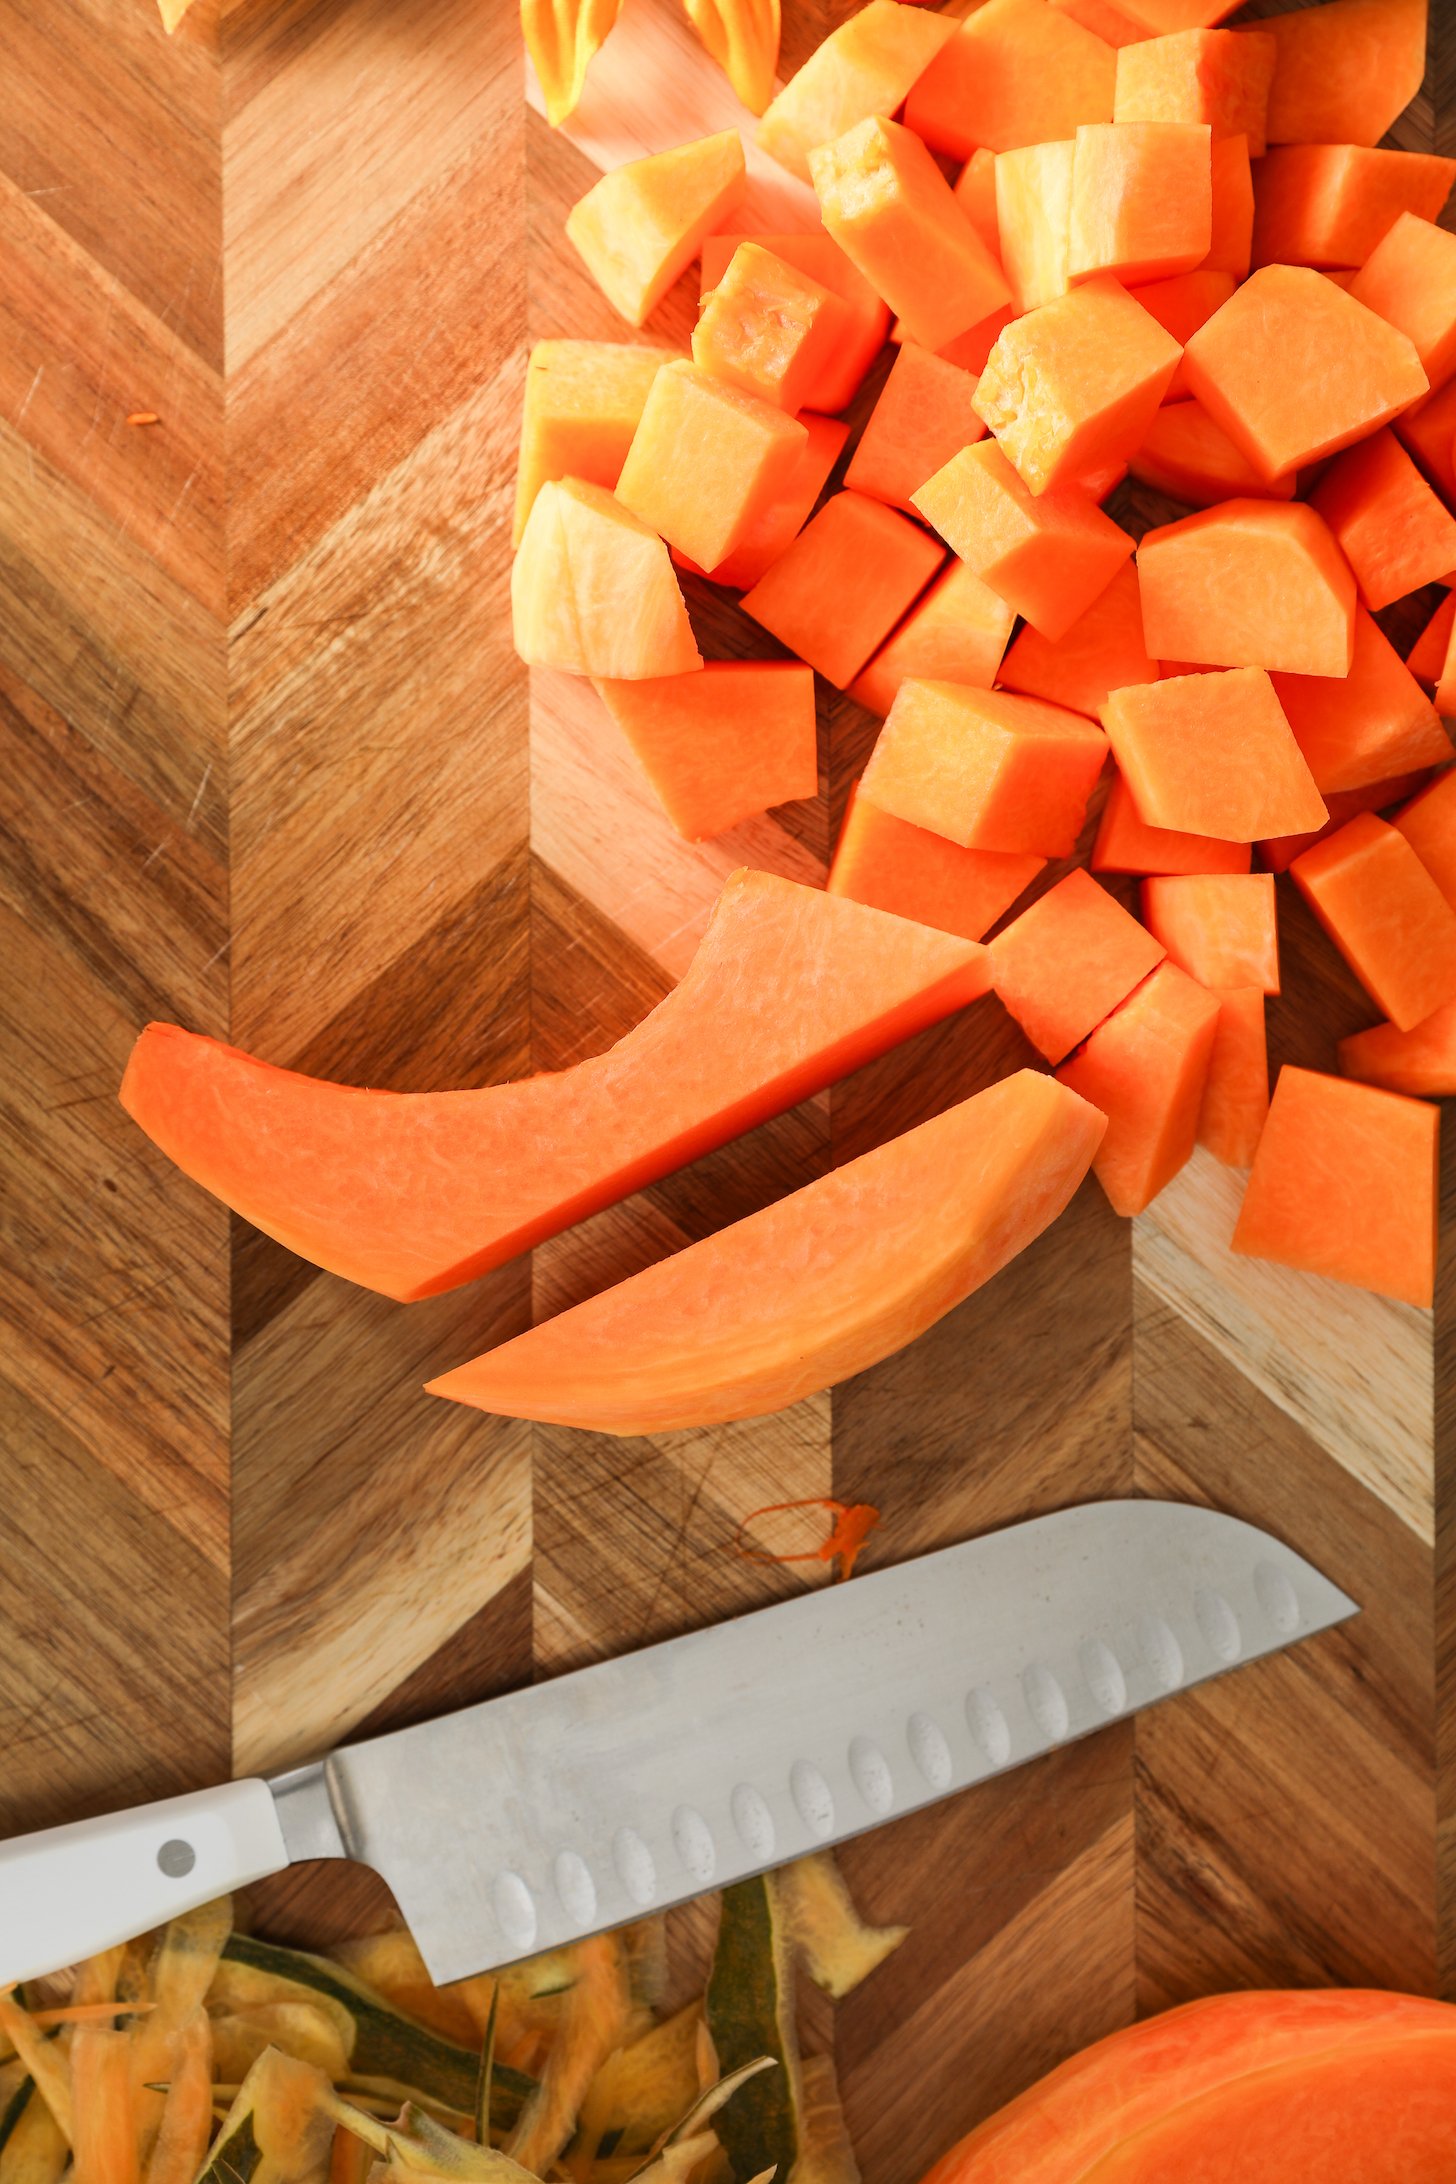 Two pumpkin sticks surrounded by chunks of pumpkin on a wooden board with a knife closeby.